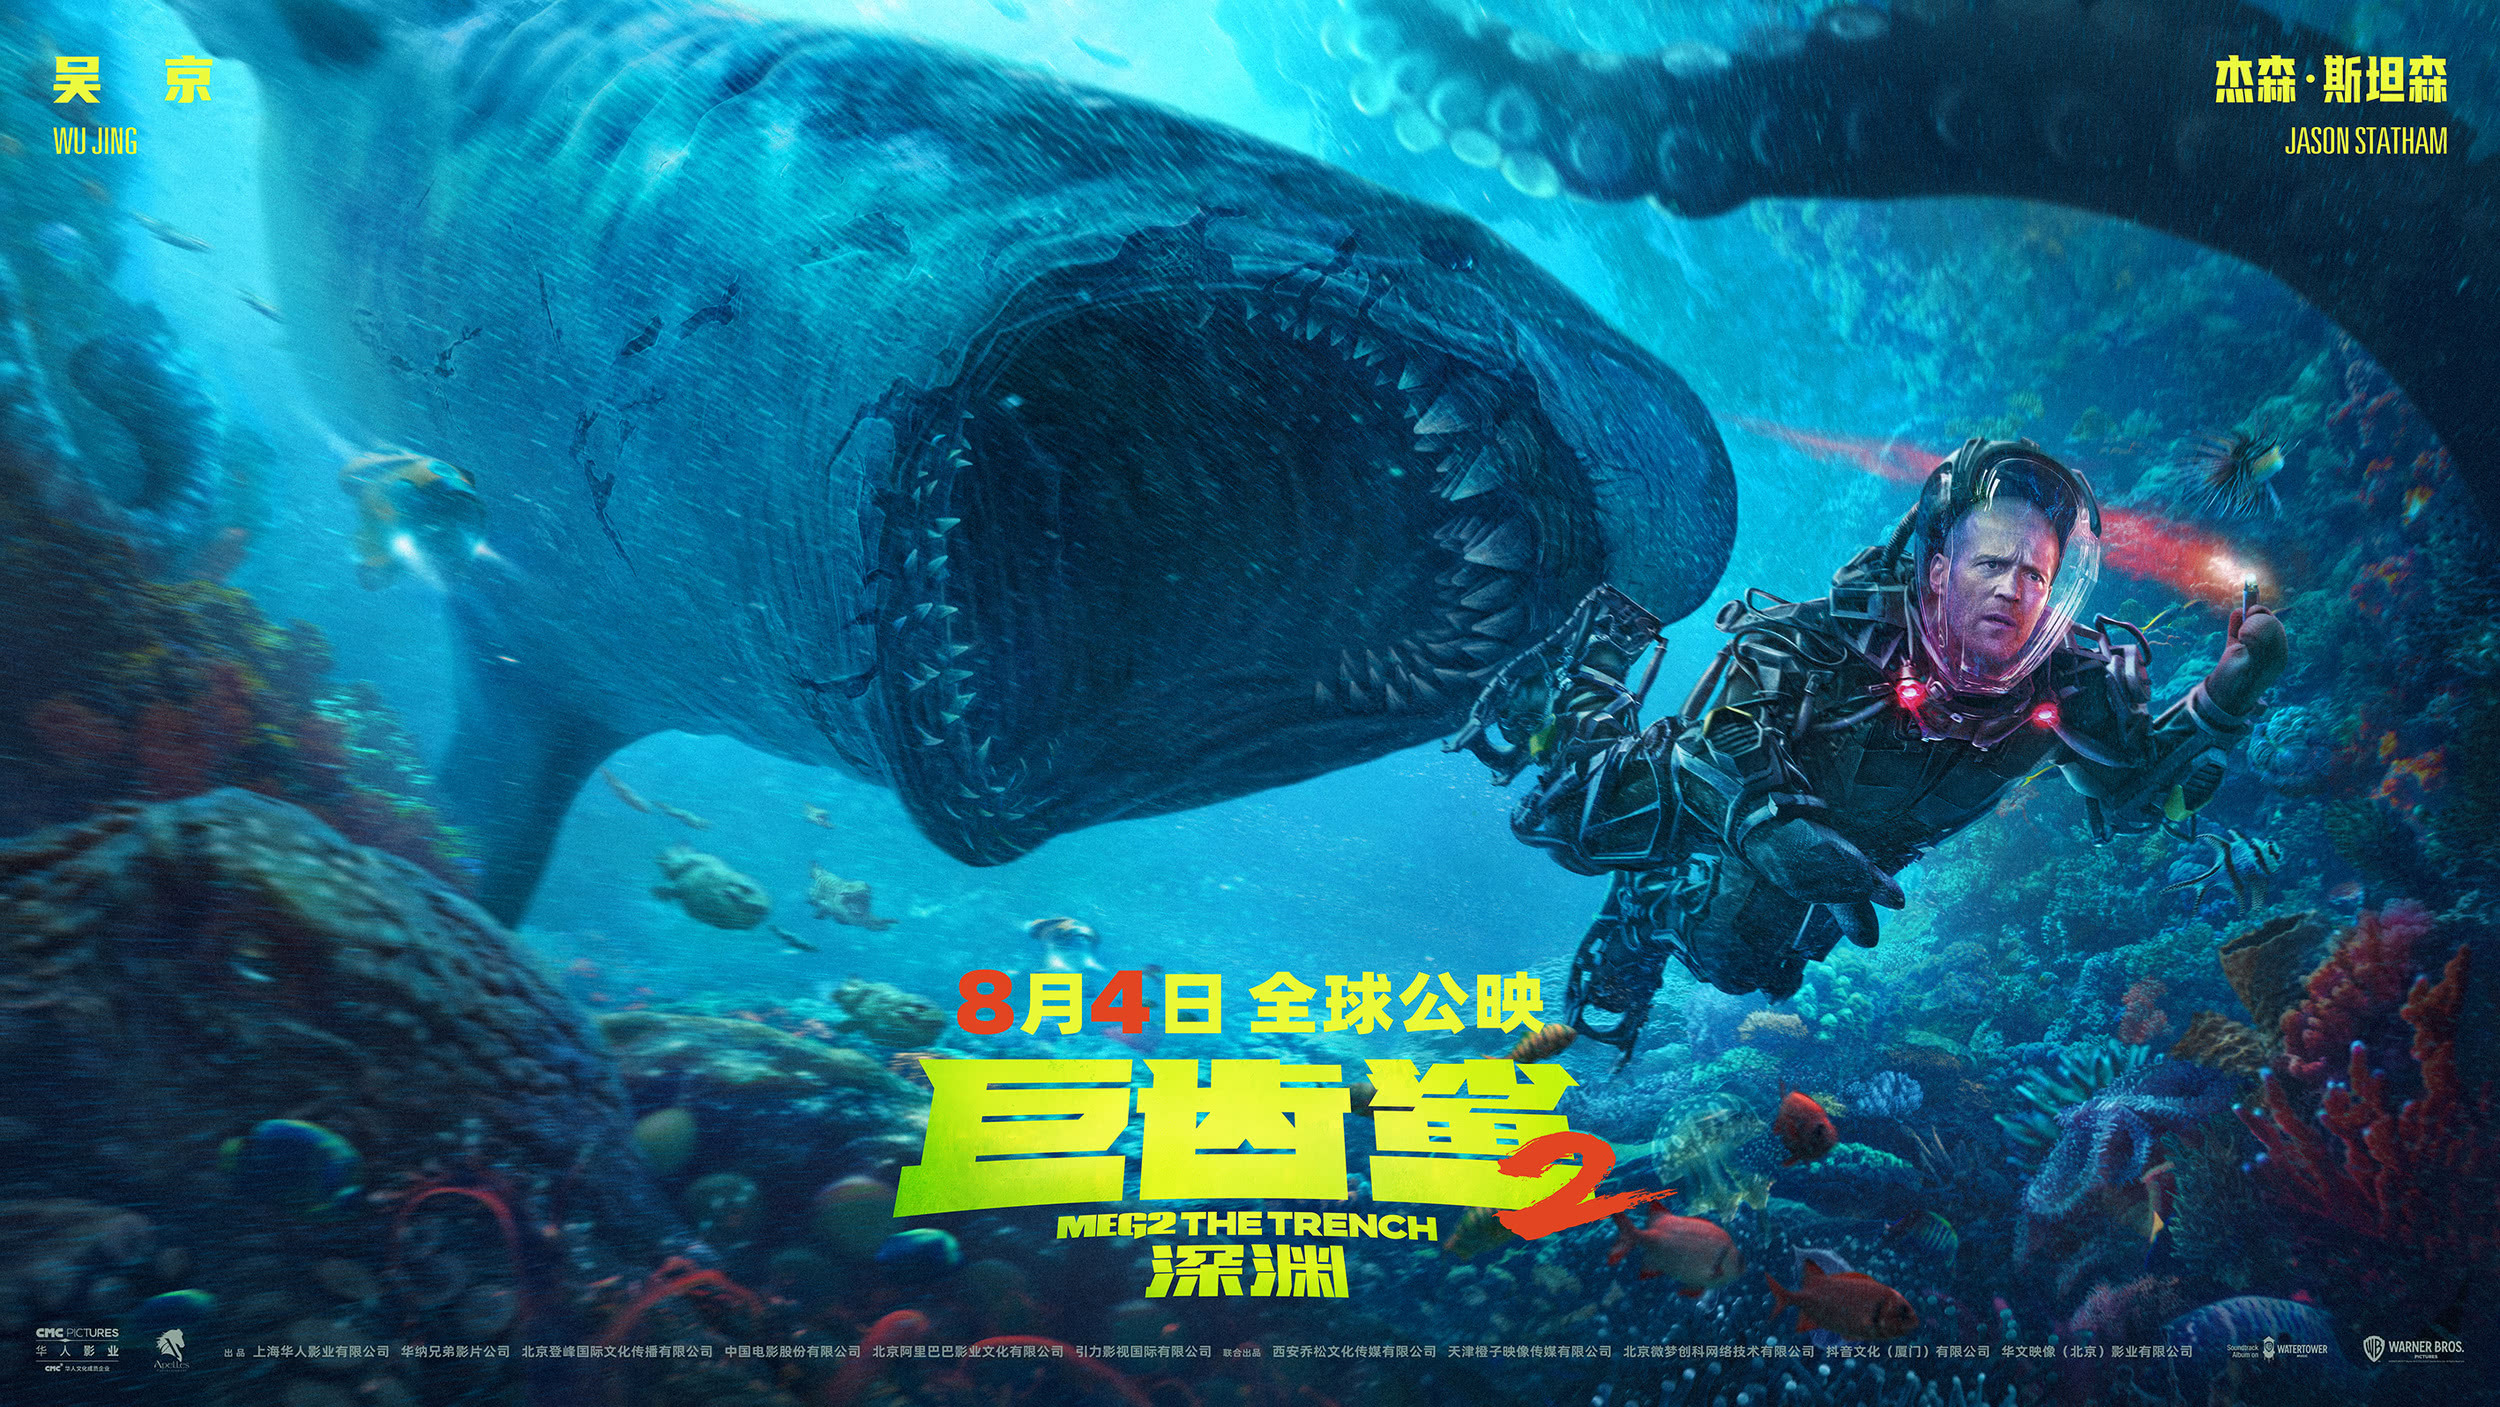 Mega Sized Movie Poster Image for Meg 2: The Trench (#18 of 23)